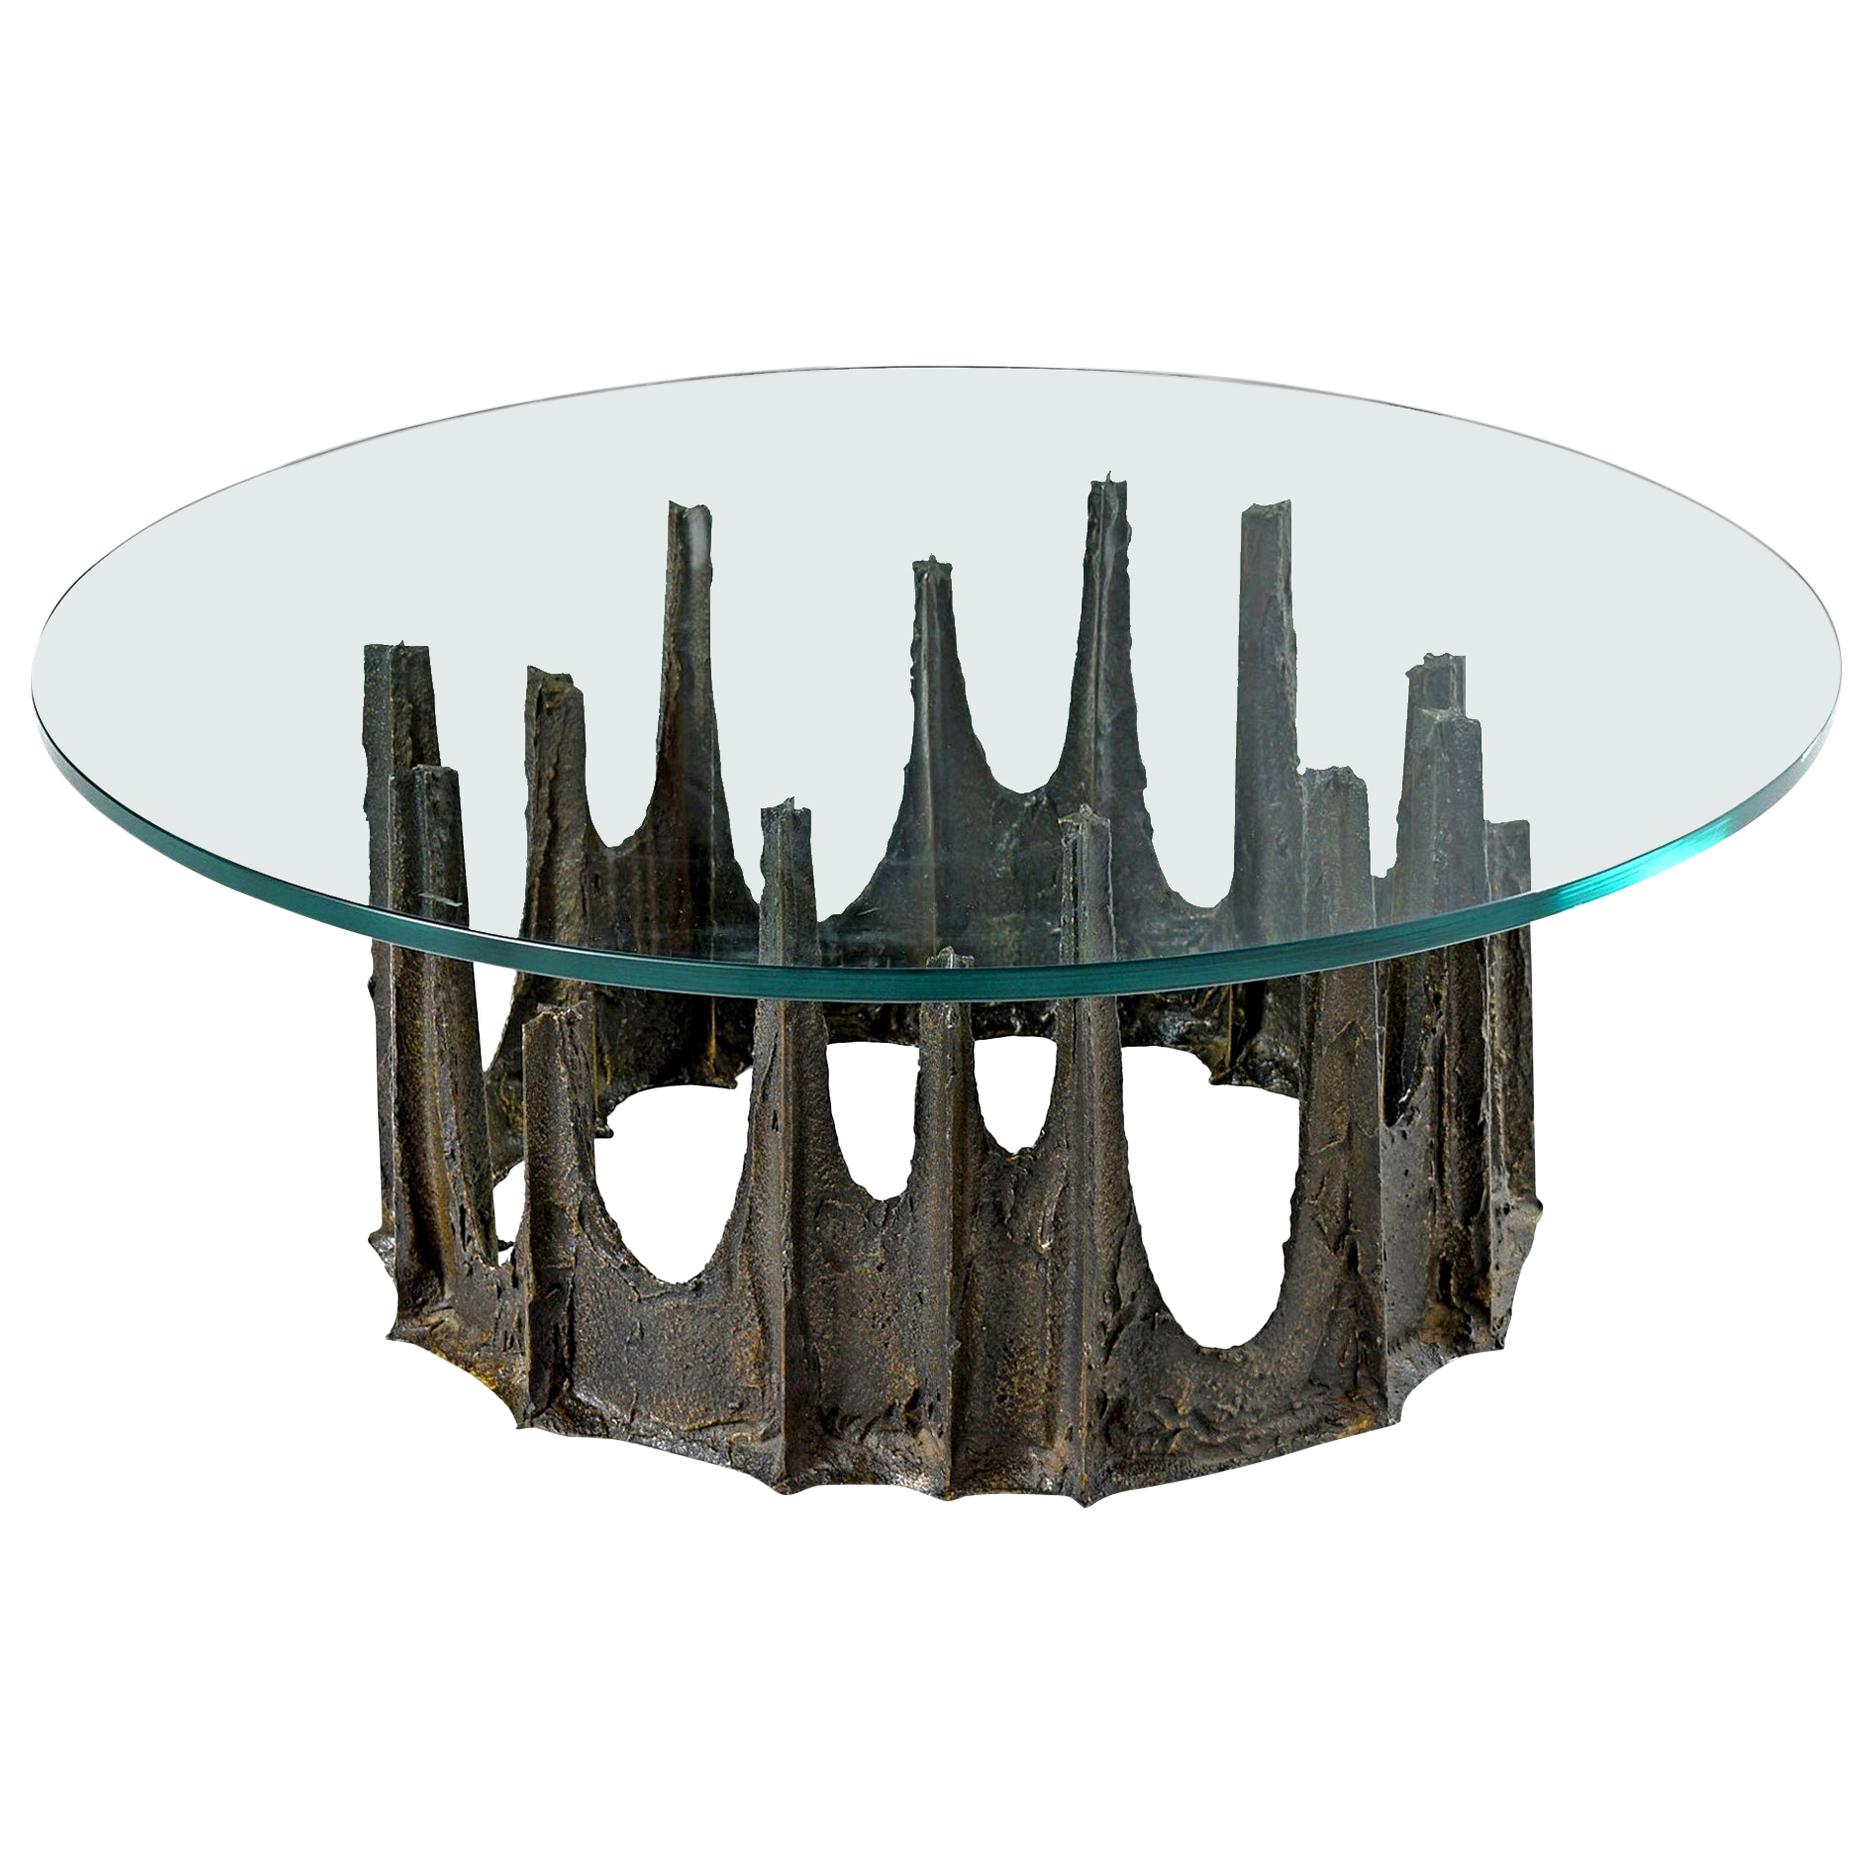 Paul Evans Stalagmite Coffee Table, Brutalist Style with New Glass Top